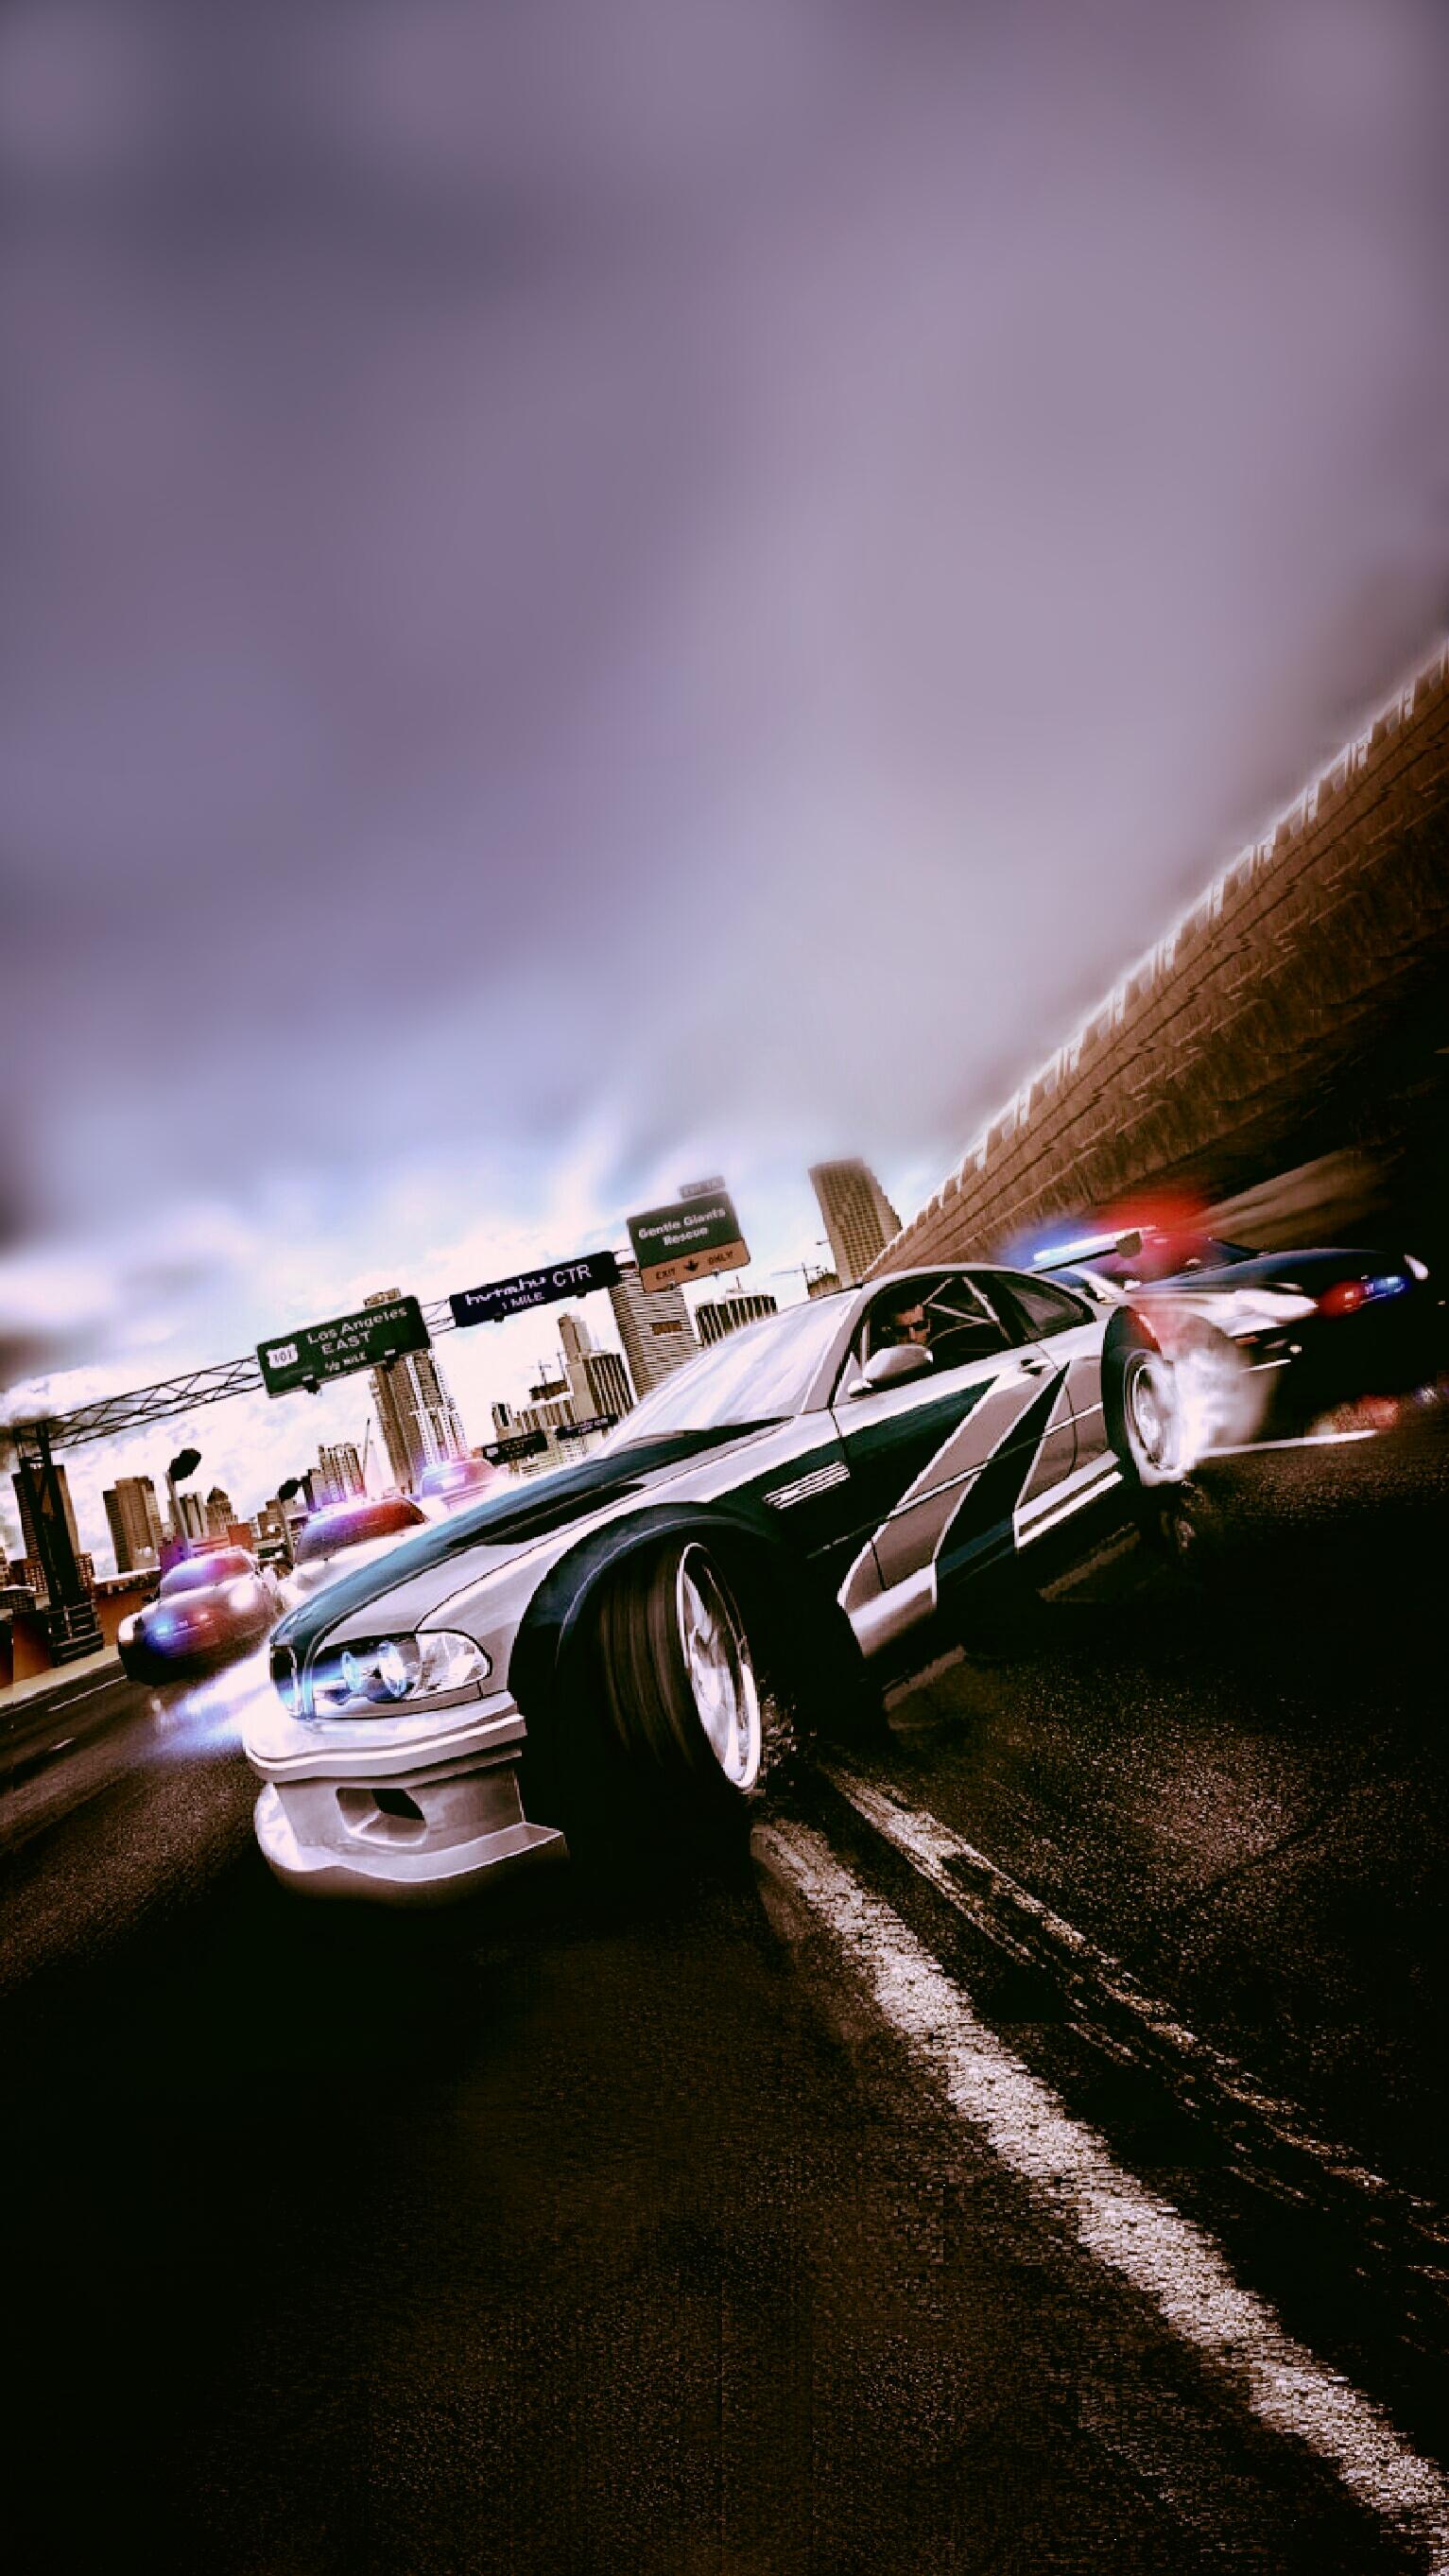 Nfs Most Wanted Wallpaper